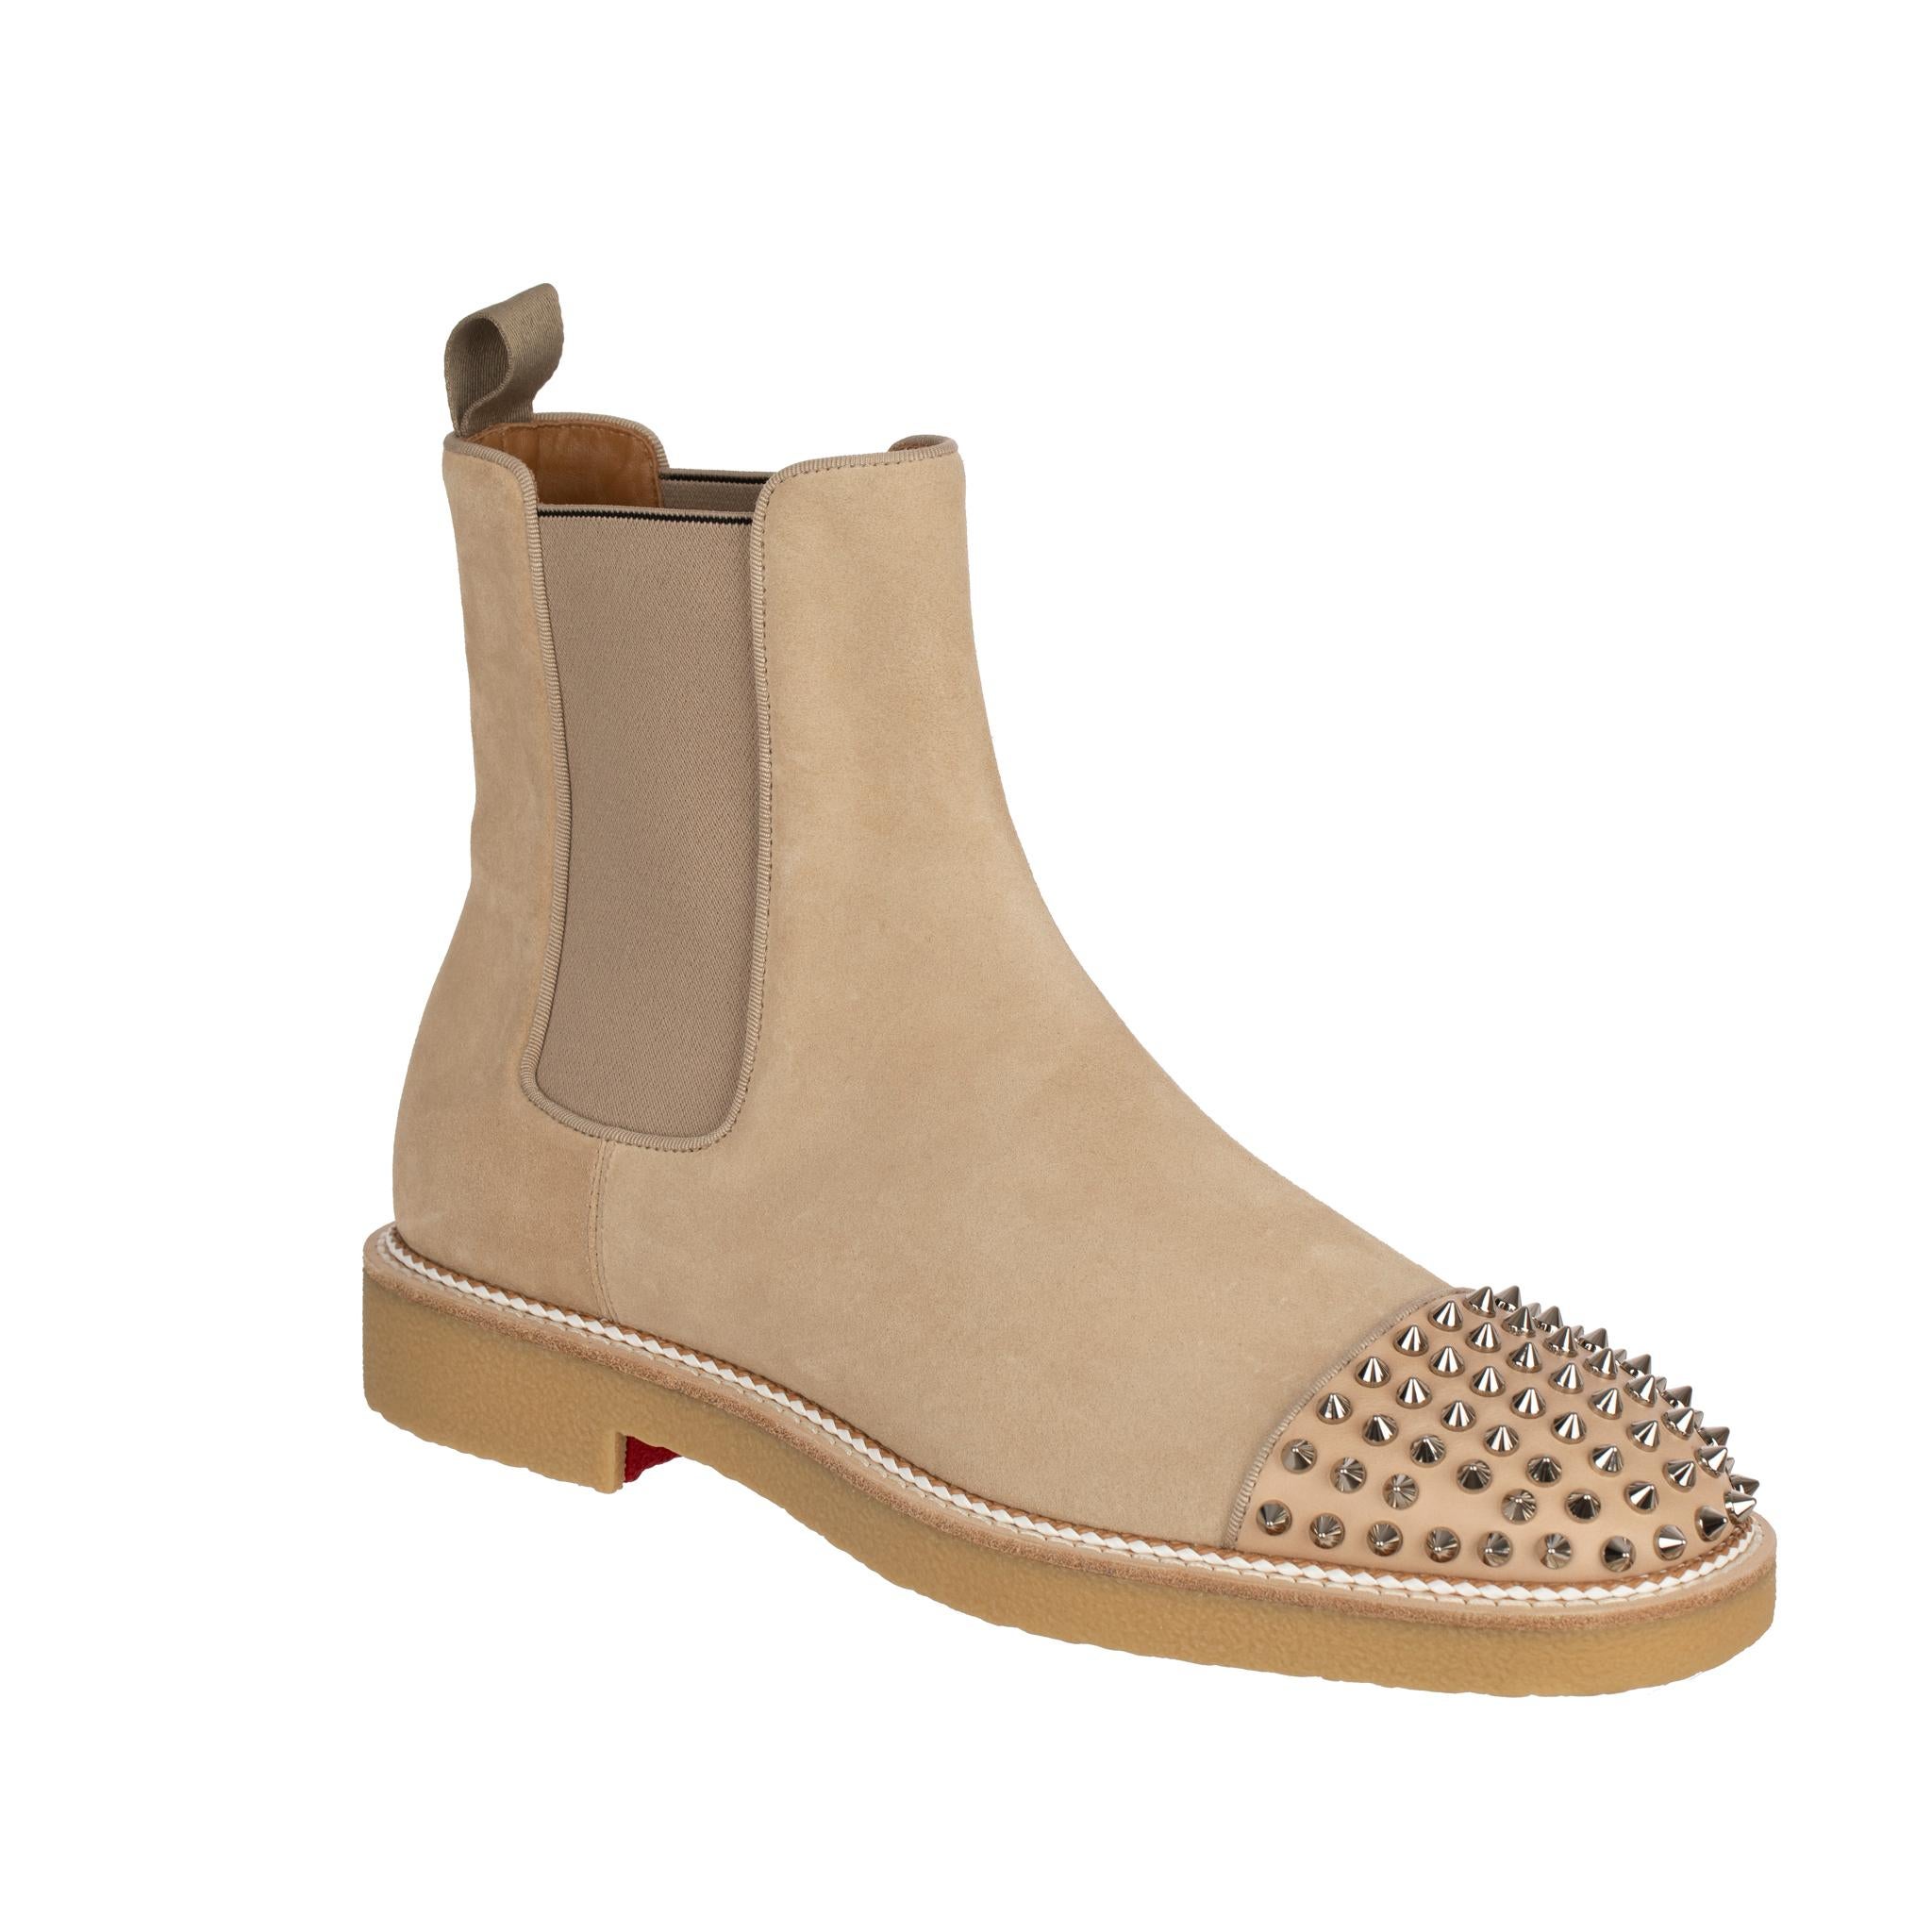 Christian Louboutin Mens Beige Suede Boots With Studs 41.5 FR For Sale 3